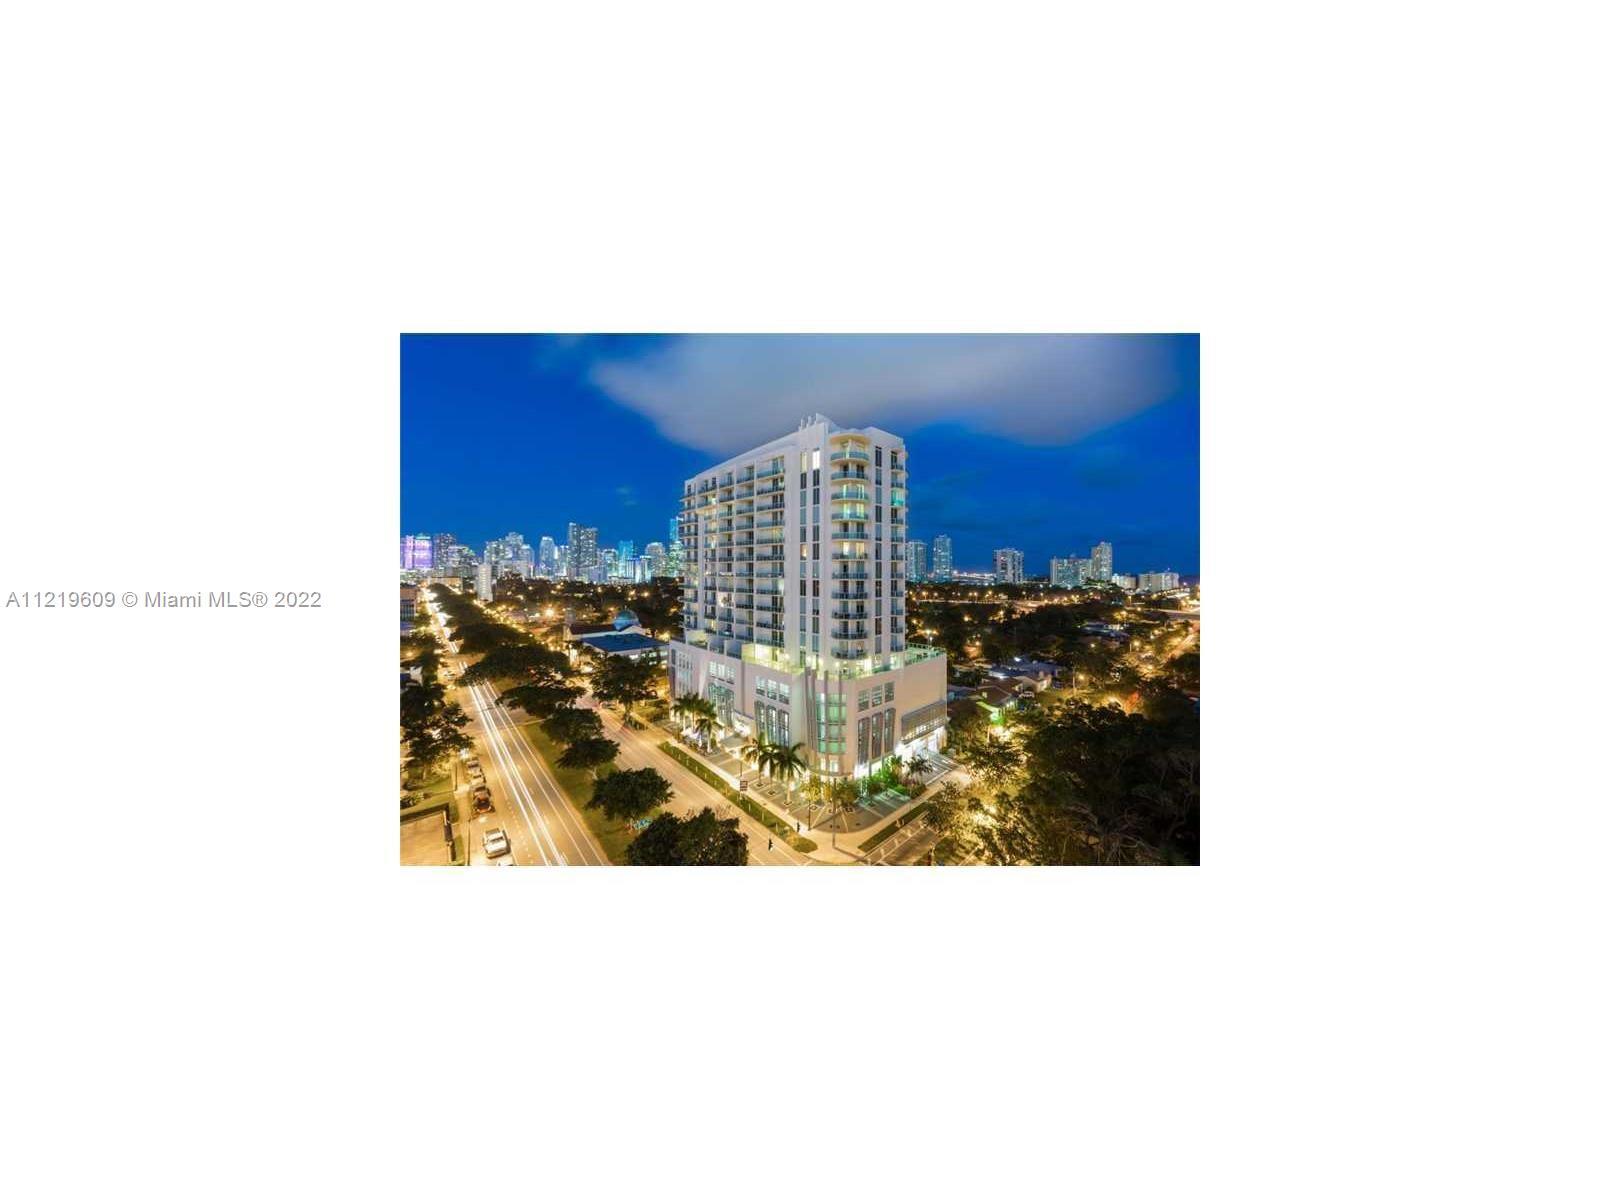 LOCATION , LOCATION!! Fabulous building, close to Brickell and Roads area. Upgraded European kitchen